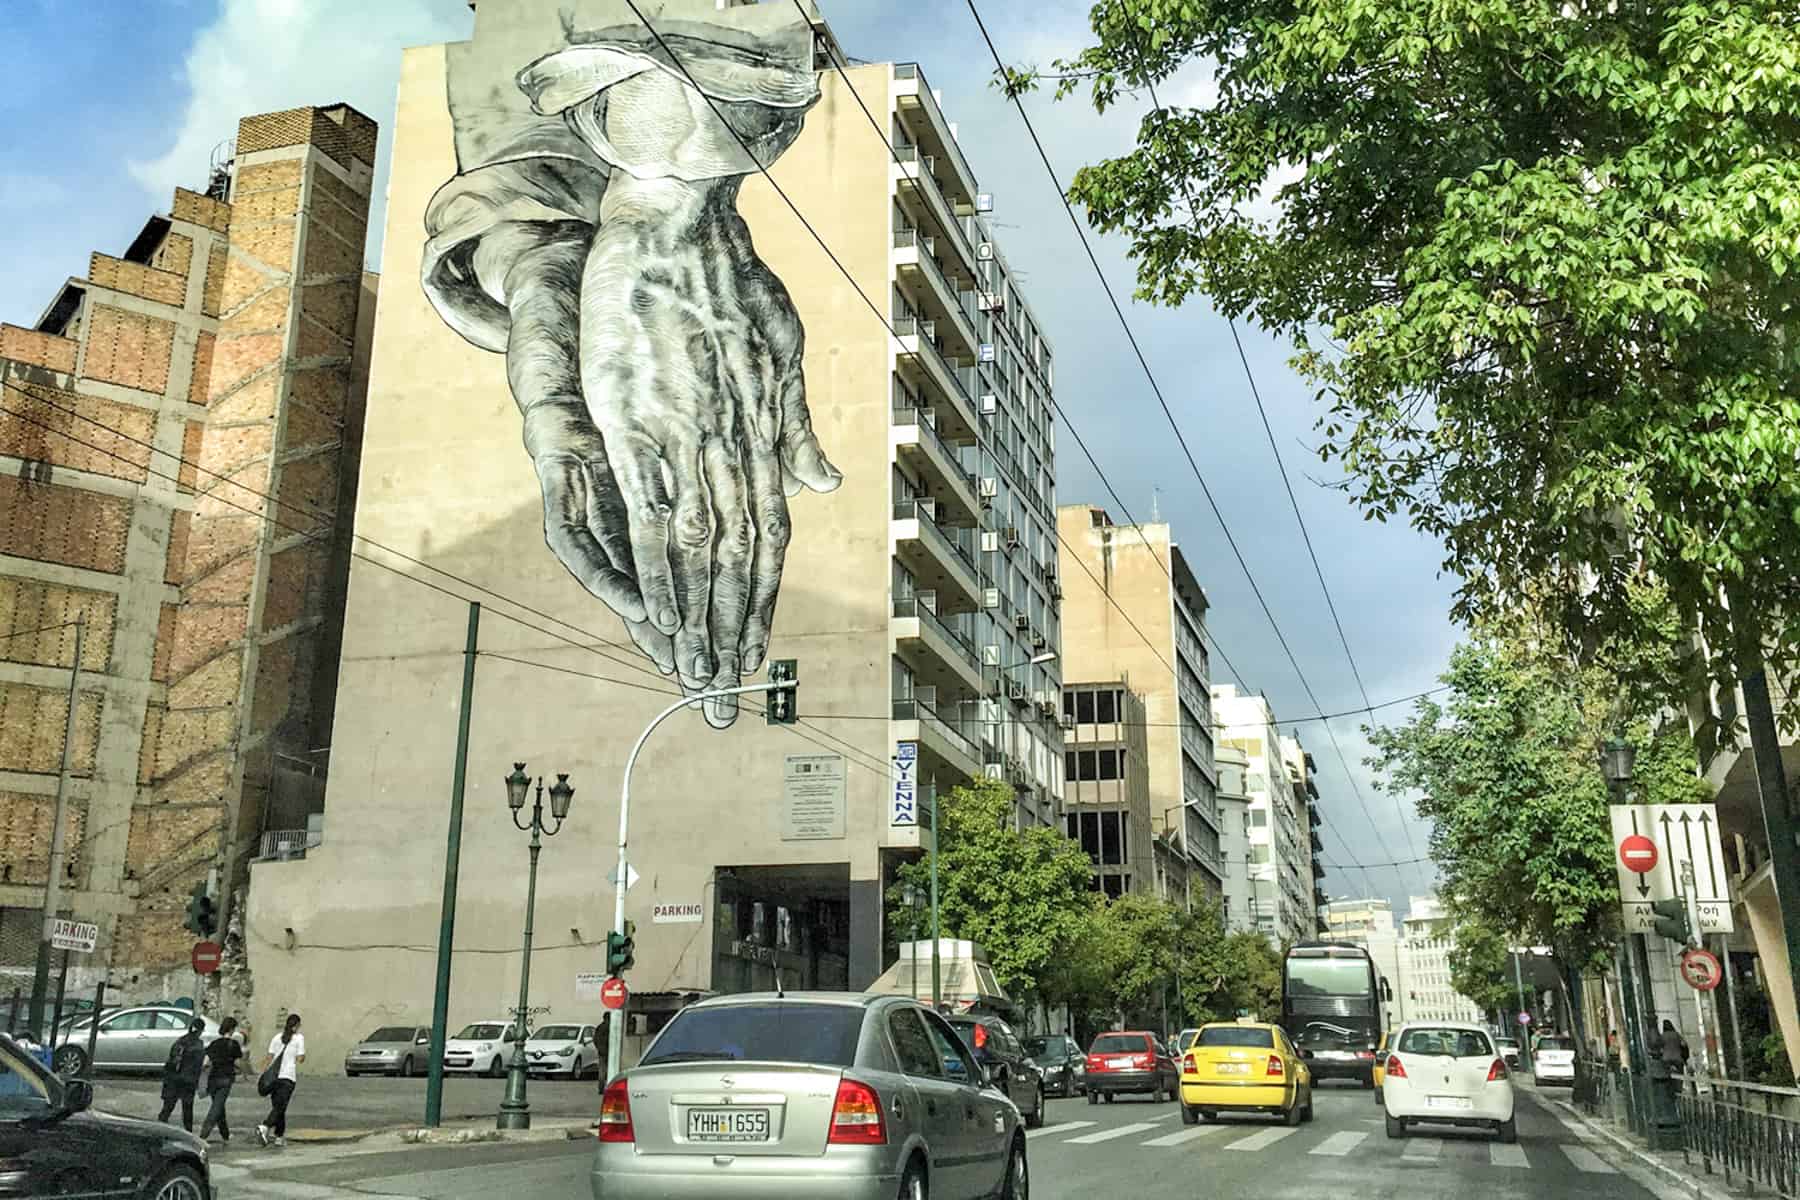 Cars driving past street art in Athens of giant praying hands on a residential building.